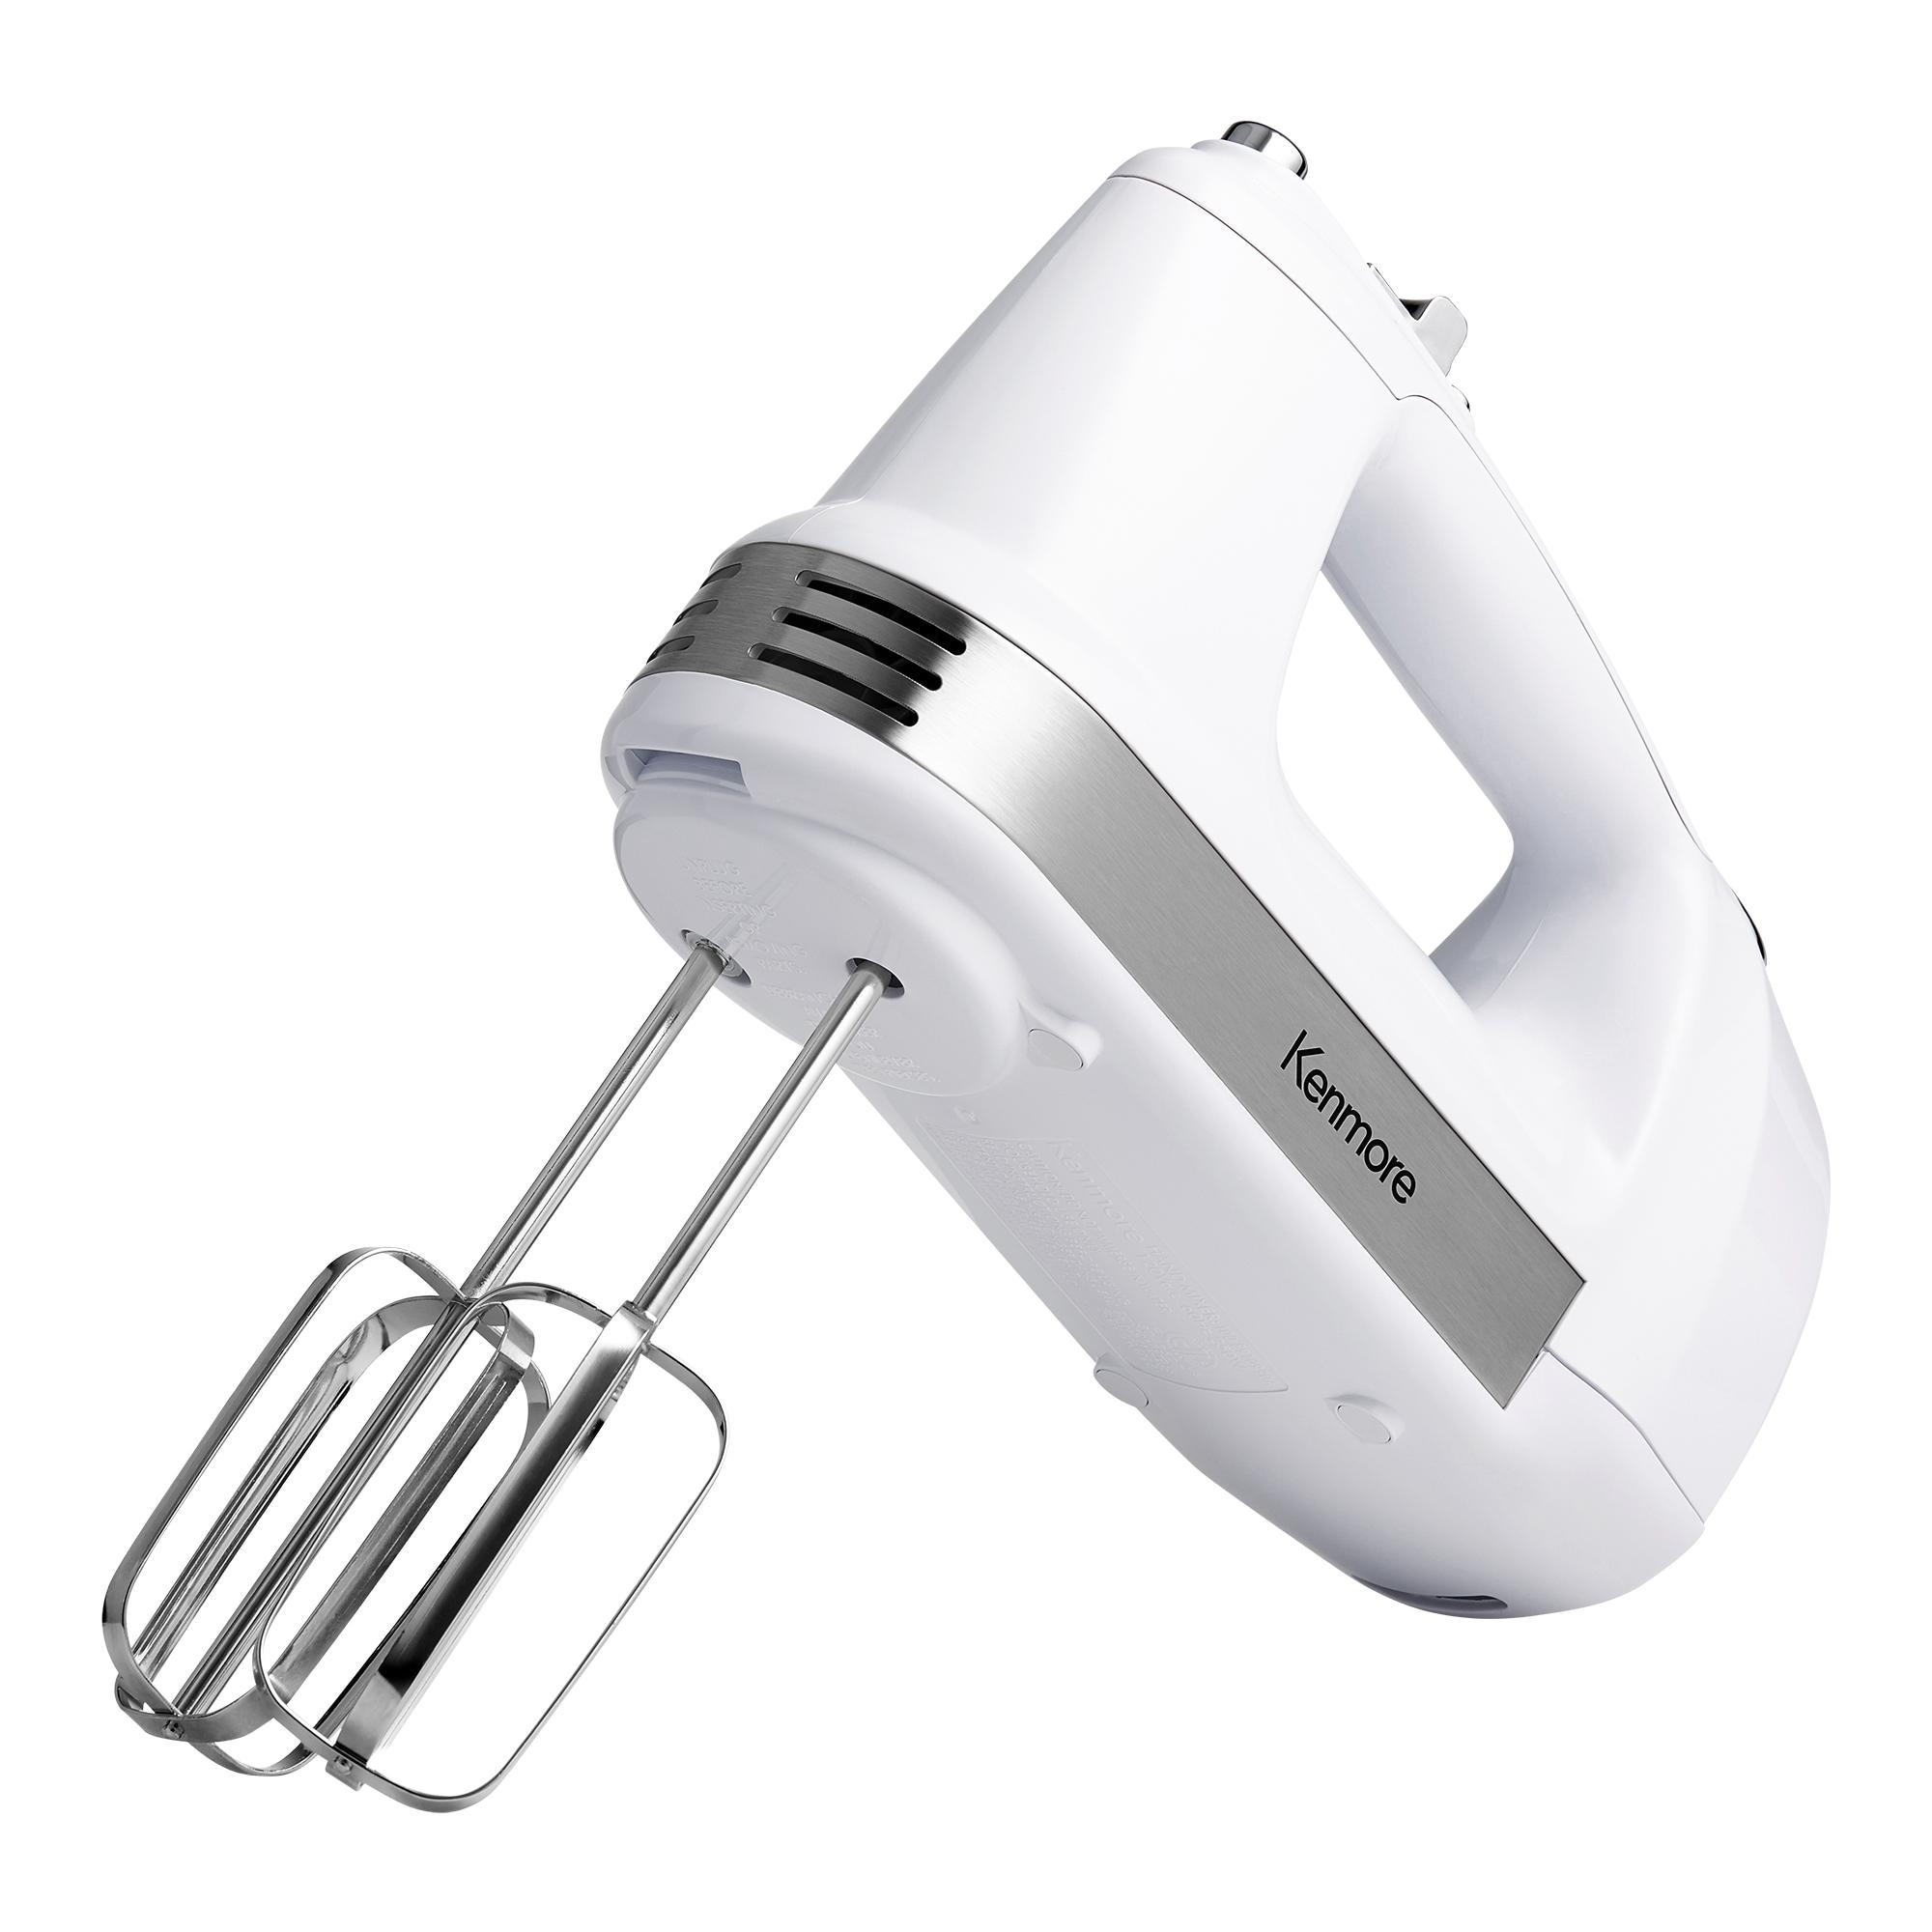 https://ak1.ostkcdn.com/images/products/is/images/direct/dce31c7f6126d51f85d6bb22bdd0000b55a7630e/Kenmore-5-Speed-Hand-Mixer---Beater---Blender%2C-White%2C-250W-Electric-Mixer-with-Dishwasher-Safe-Beaters%2C-Dough-Hooks.jpg